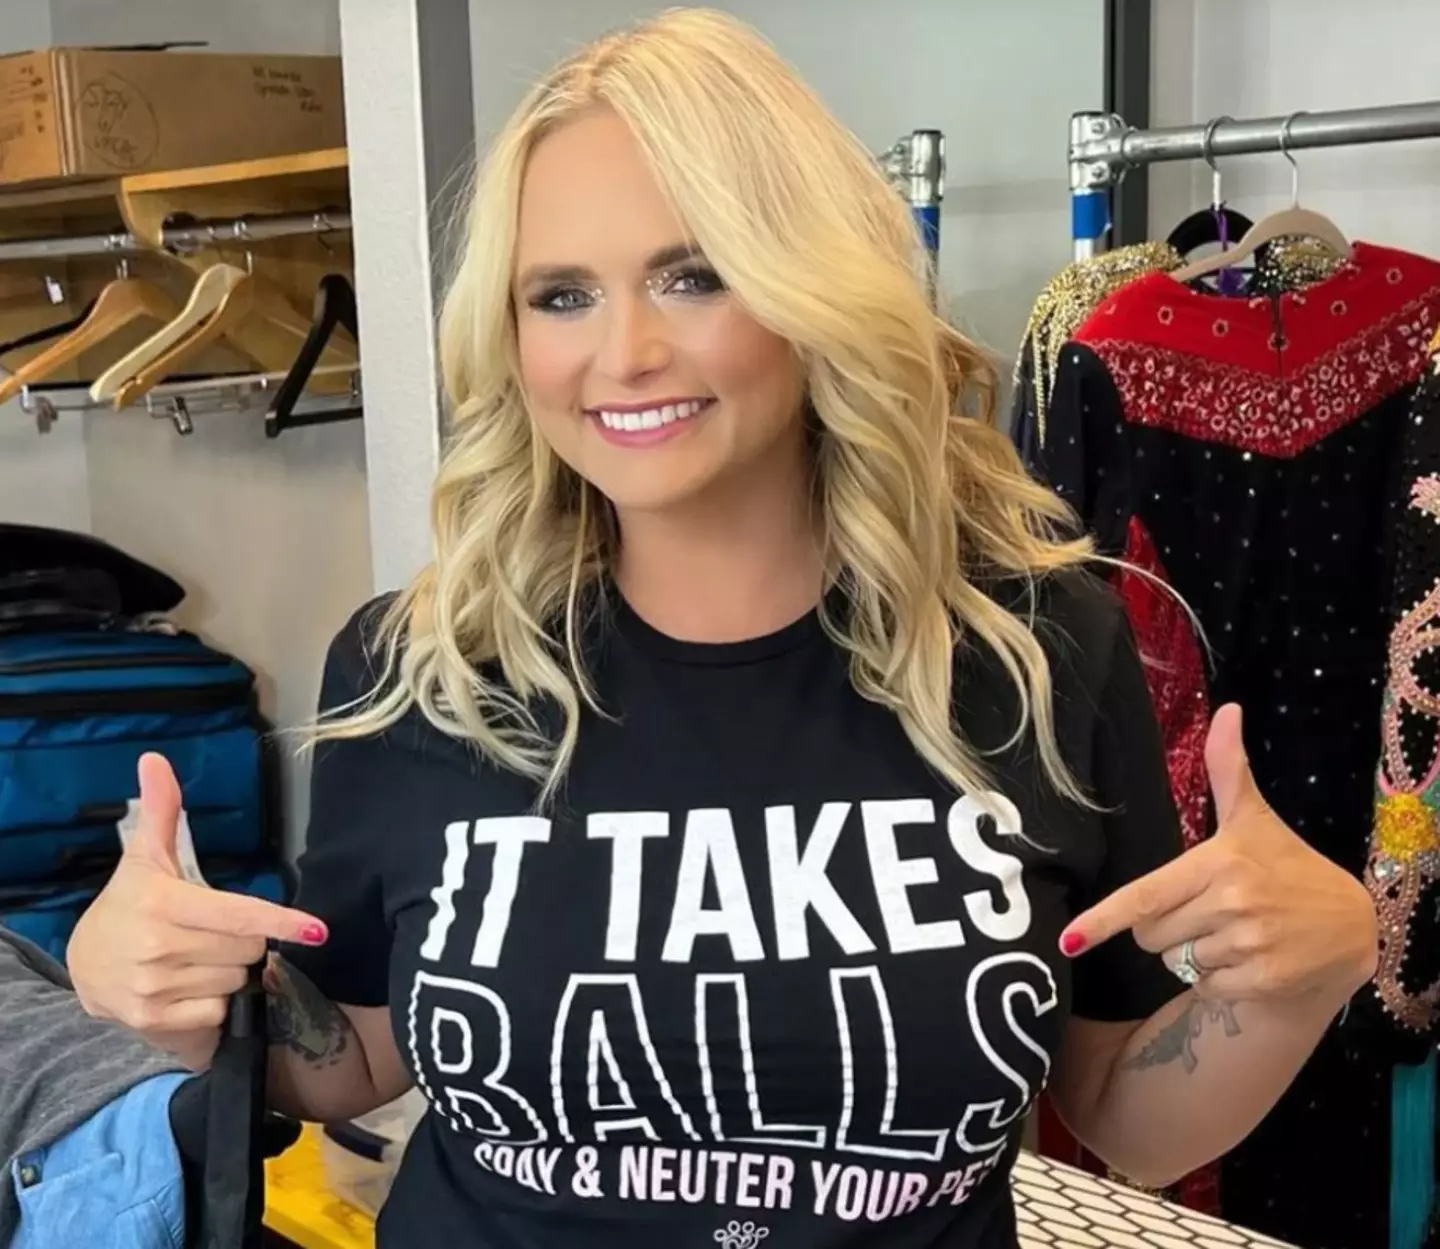 Miranda Lambert shared this image to Instagram days after going viral for telling off fans at a concert.